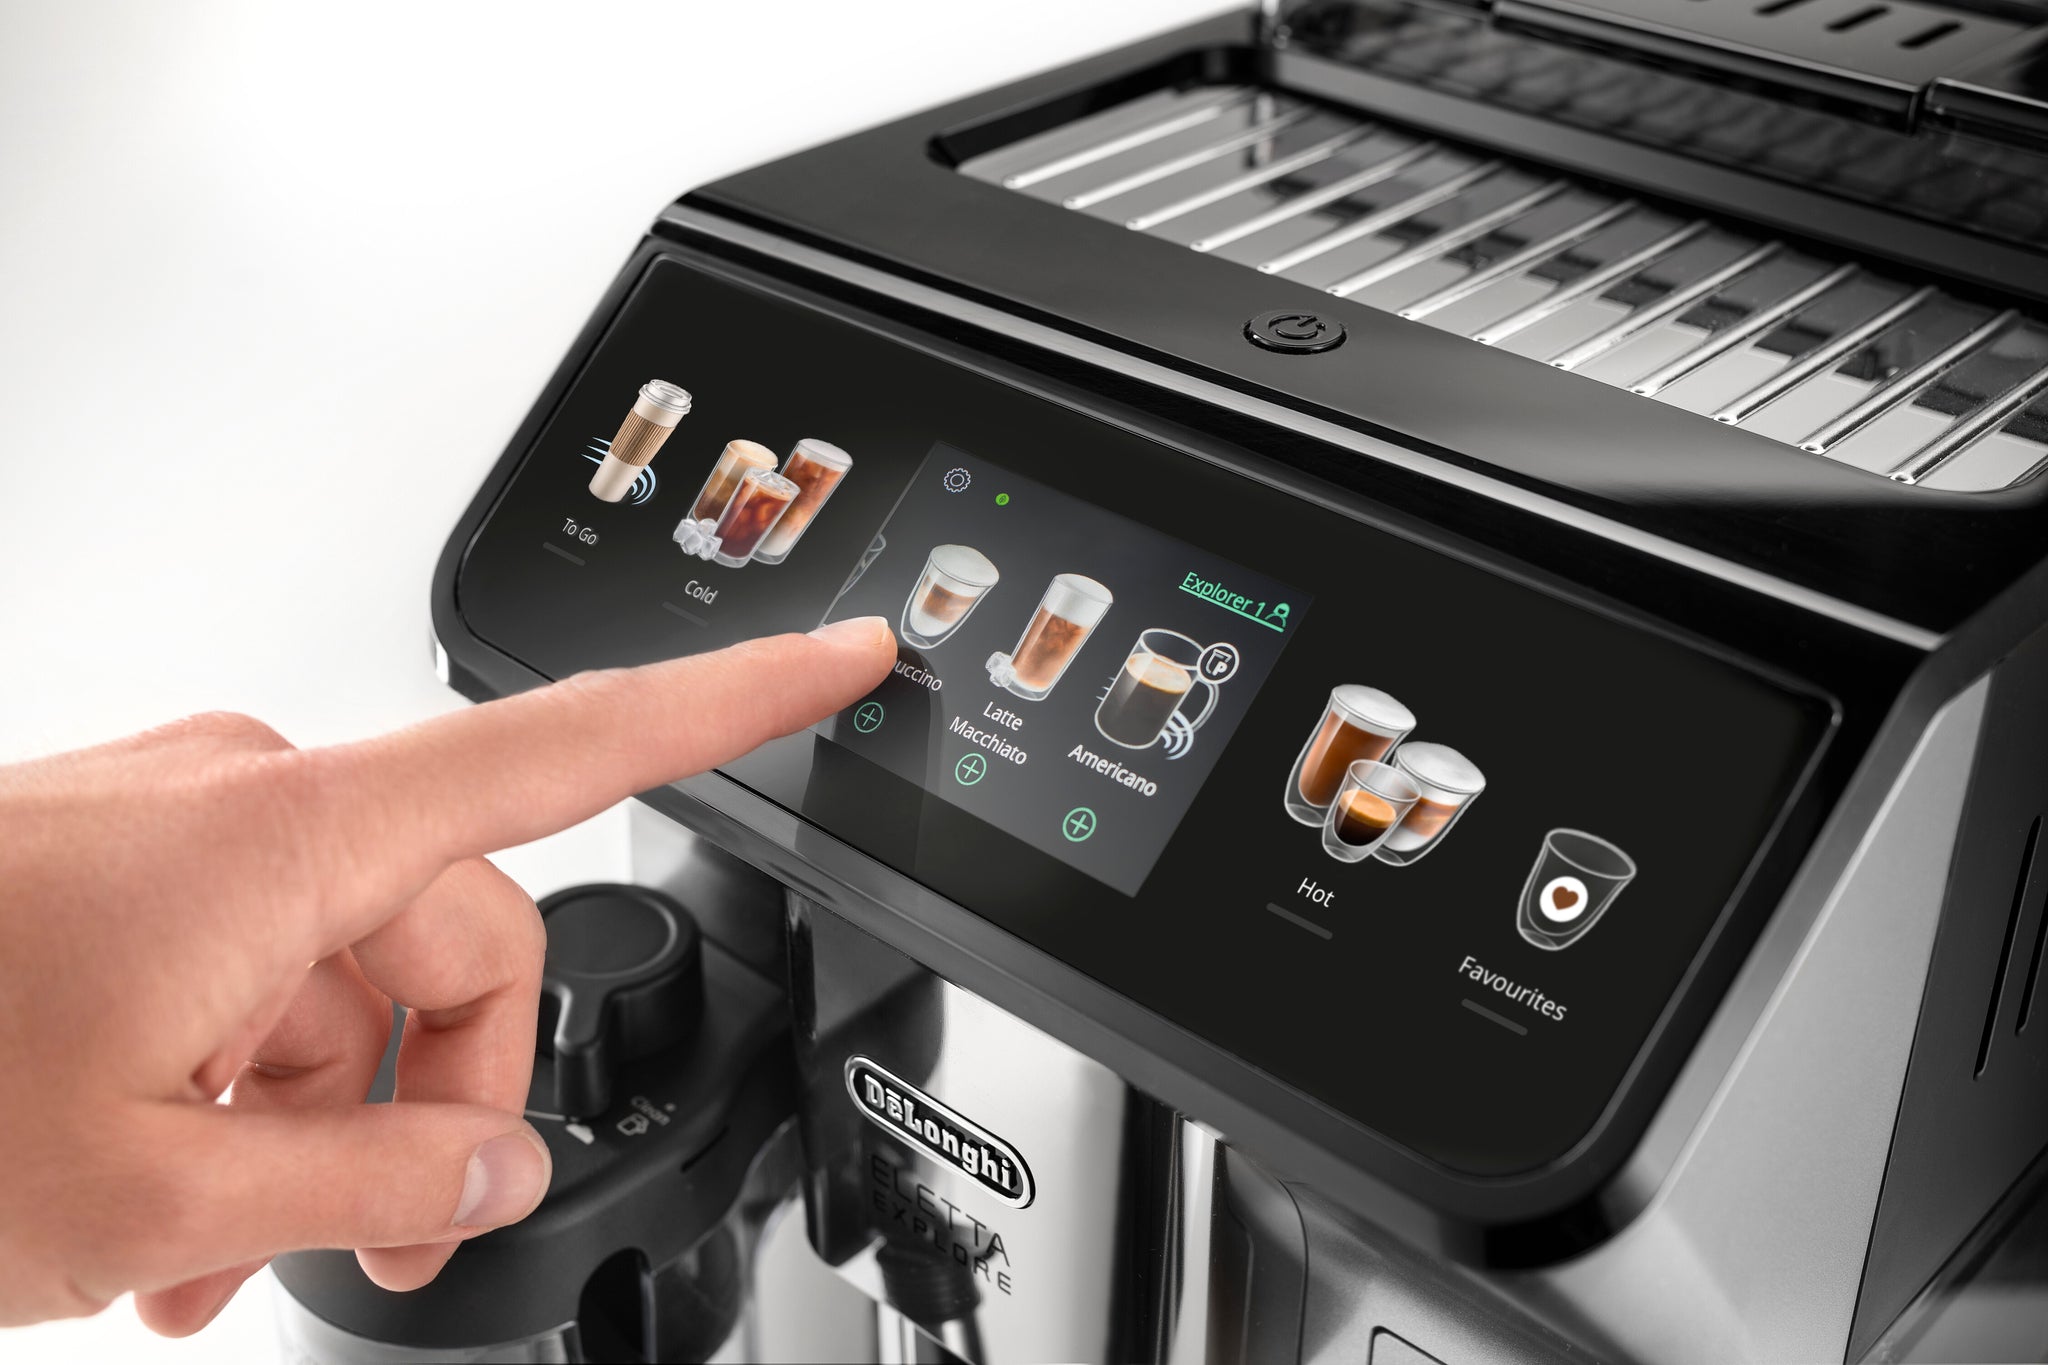 Delonghi Eletta Explore Fully Automatic Coffee Machine - Display Models Only